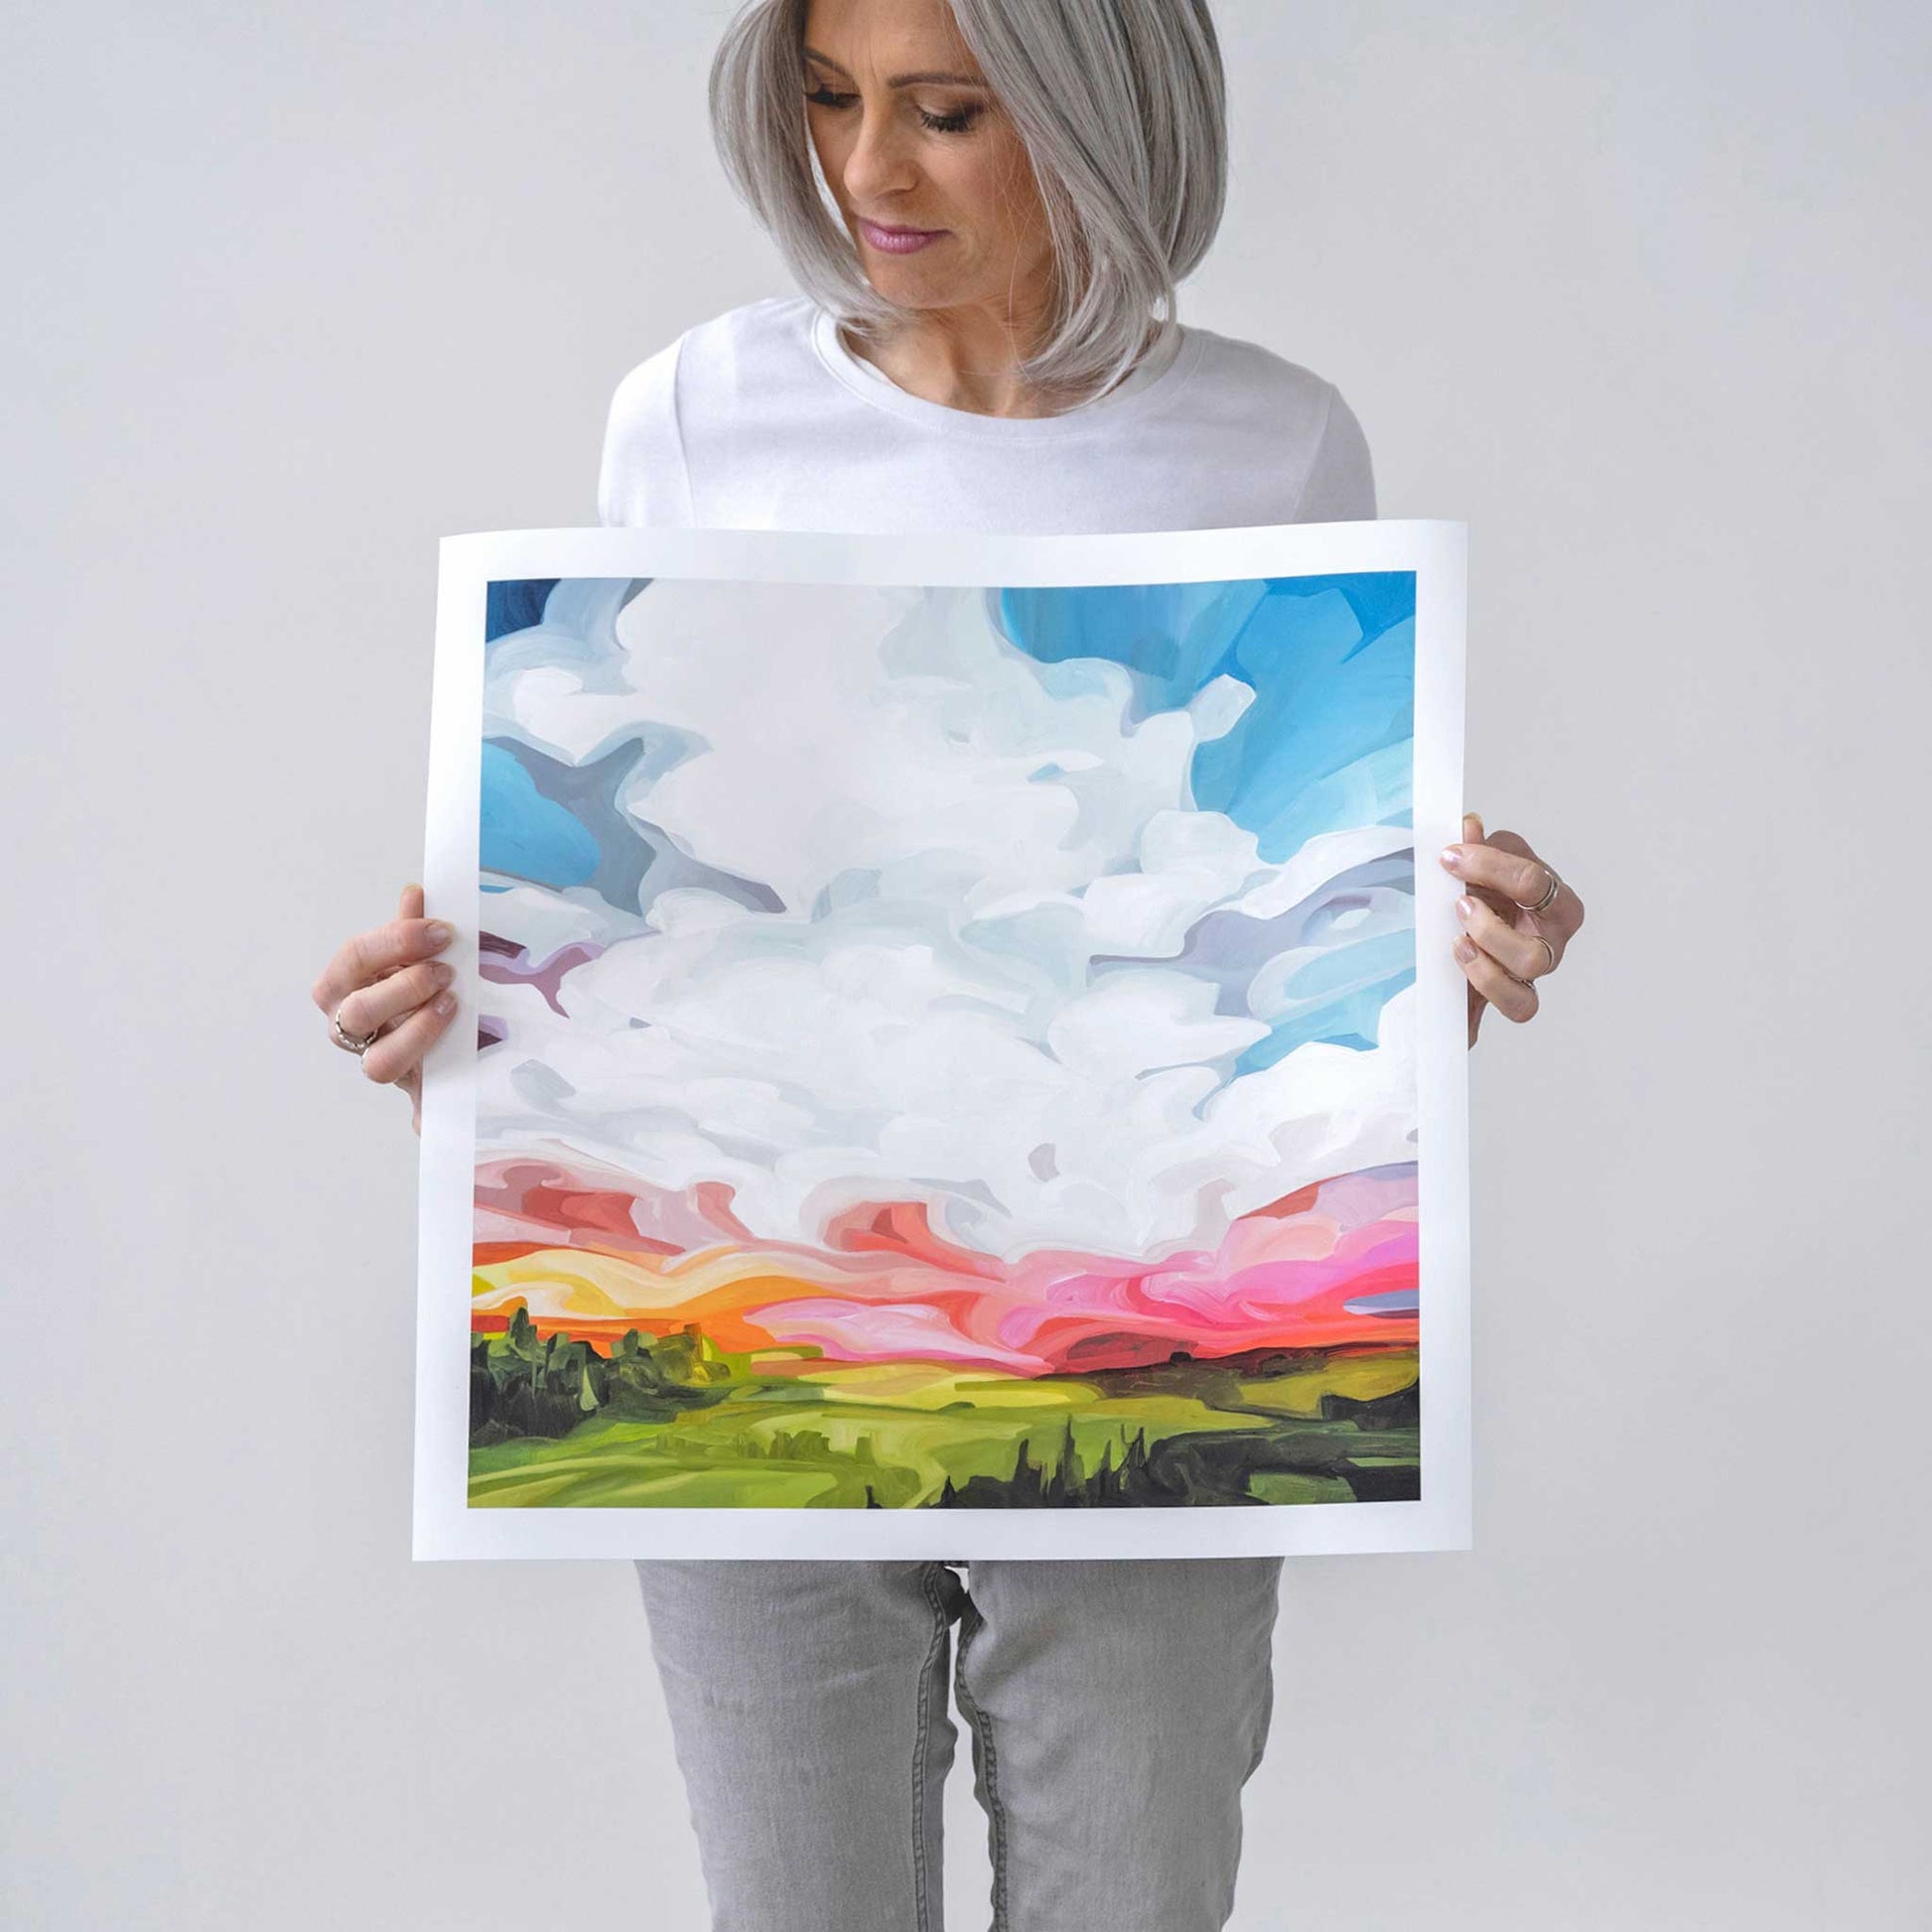 Canadian artist Susannah Bleasby holding sky painting square art print of a vibrant abstract sky